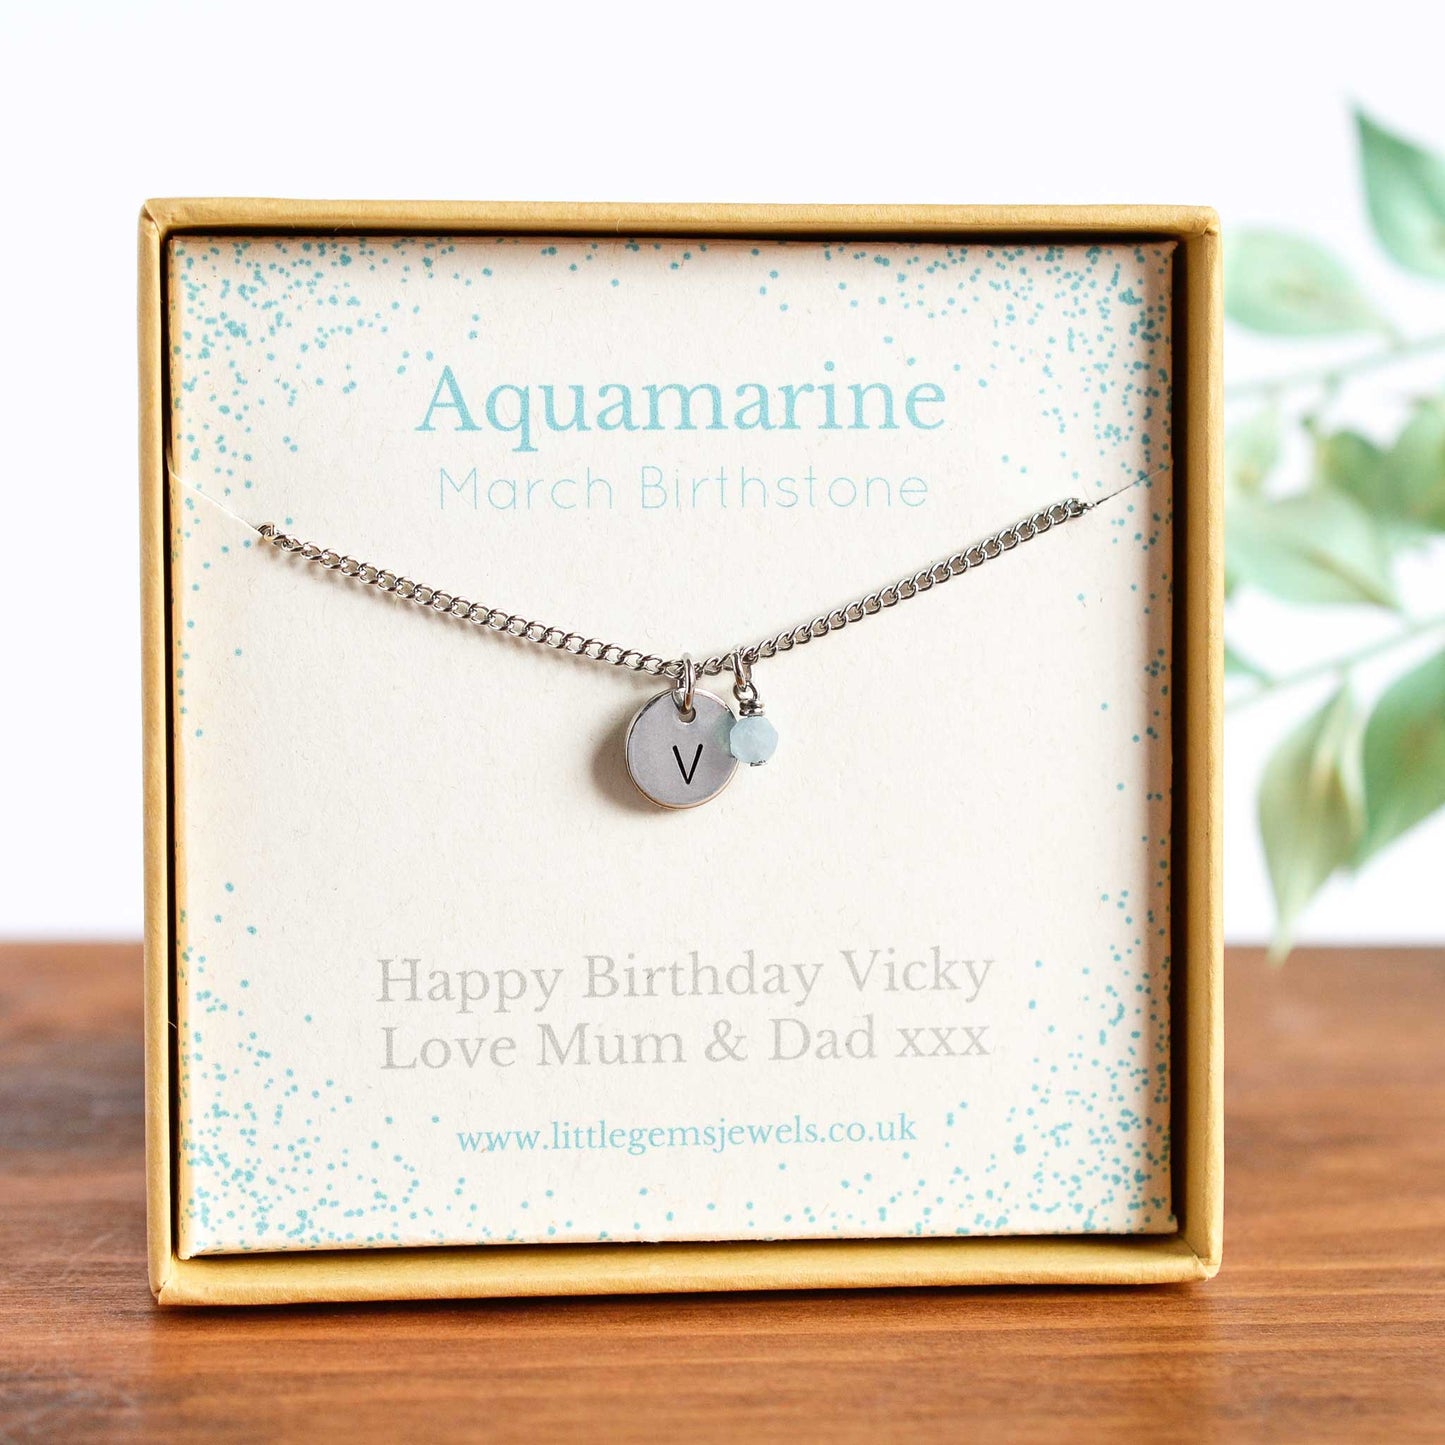 March Birthstone necklace with initial charm & personalised gift message in eco friendly gift box